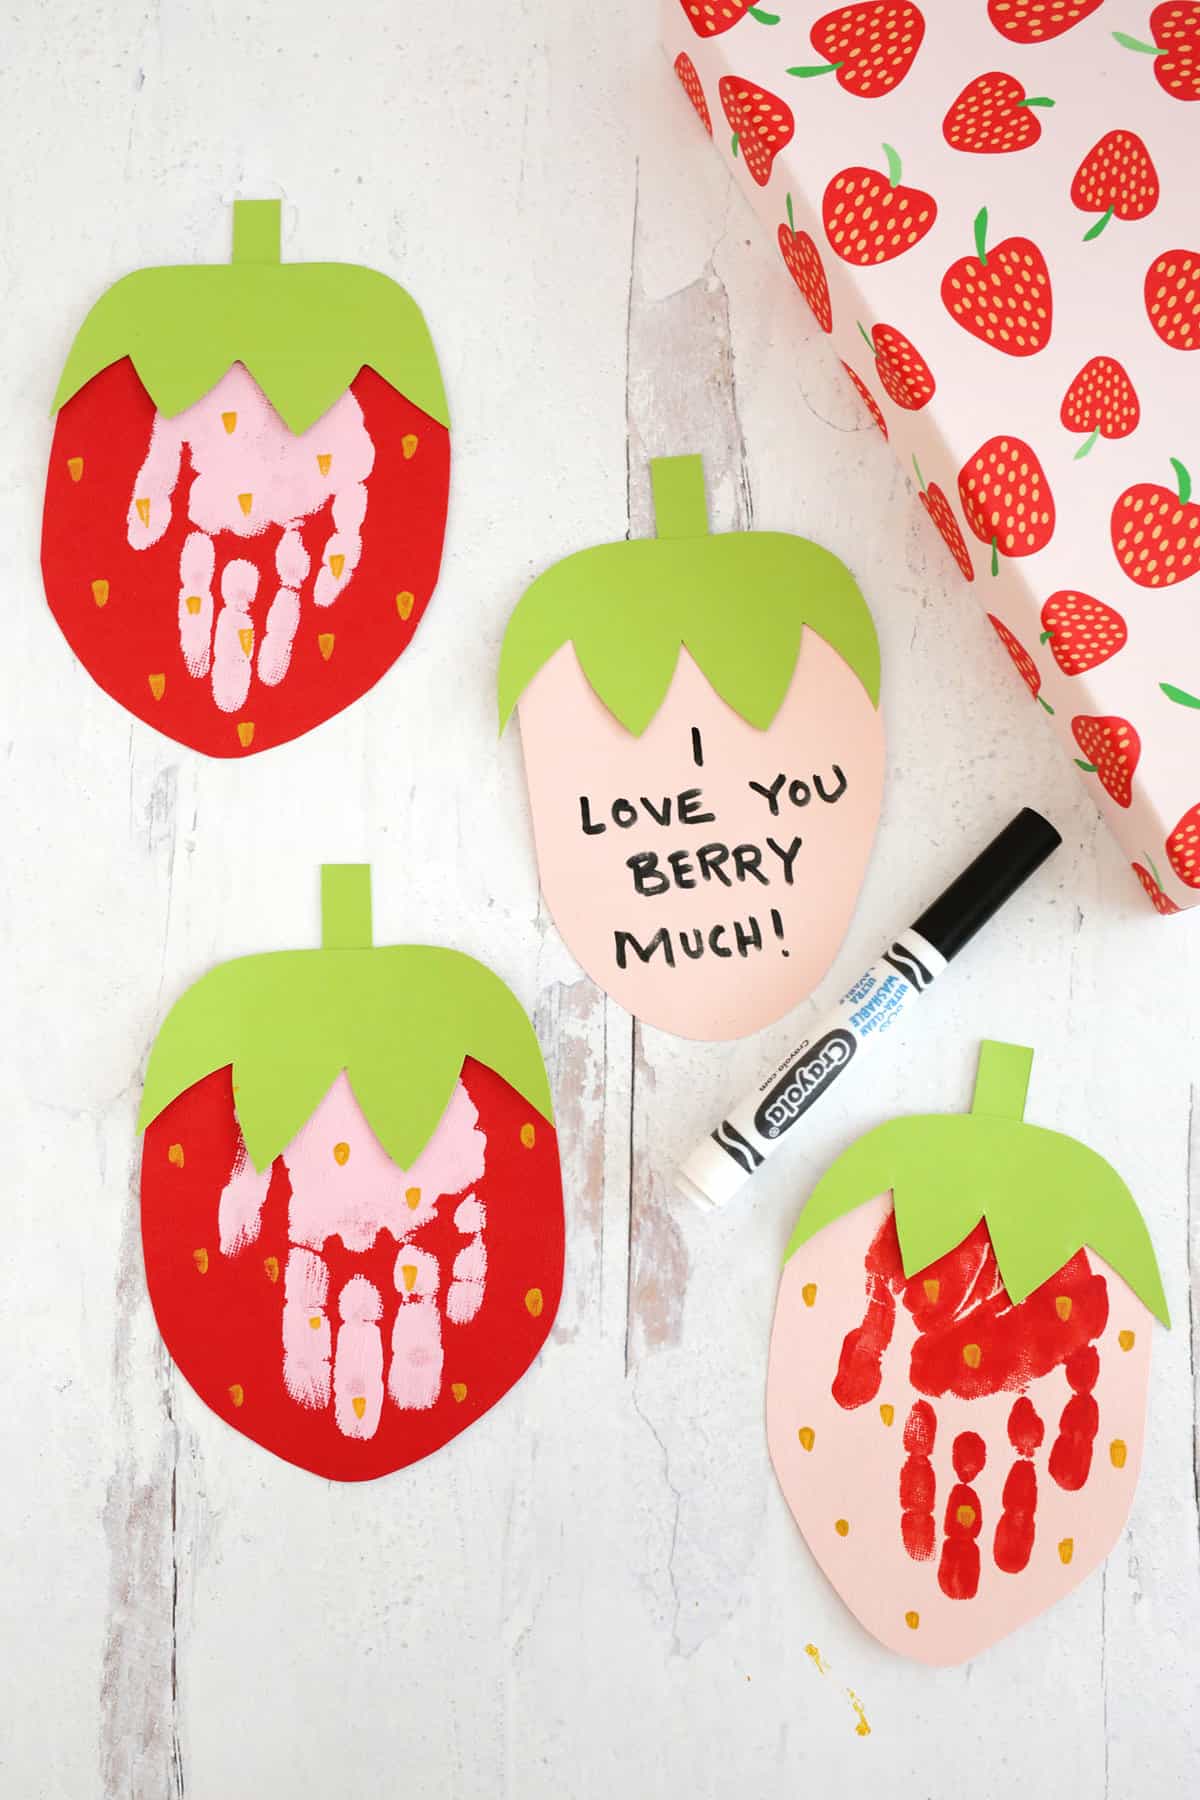 strawberry handprint cards sitting on table